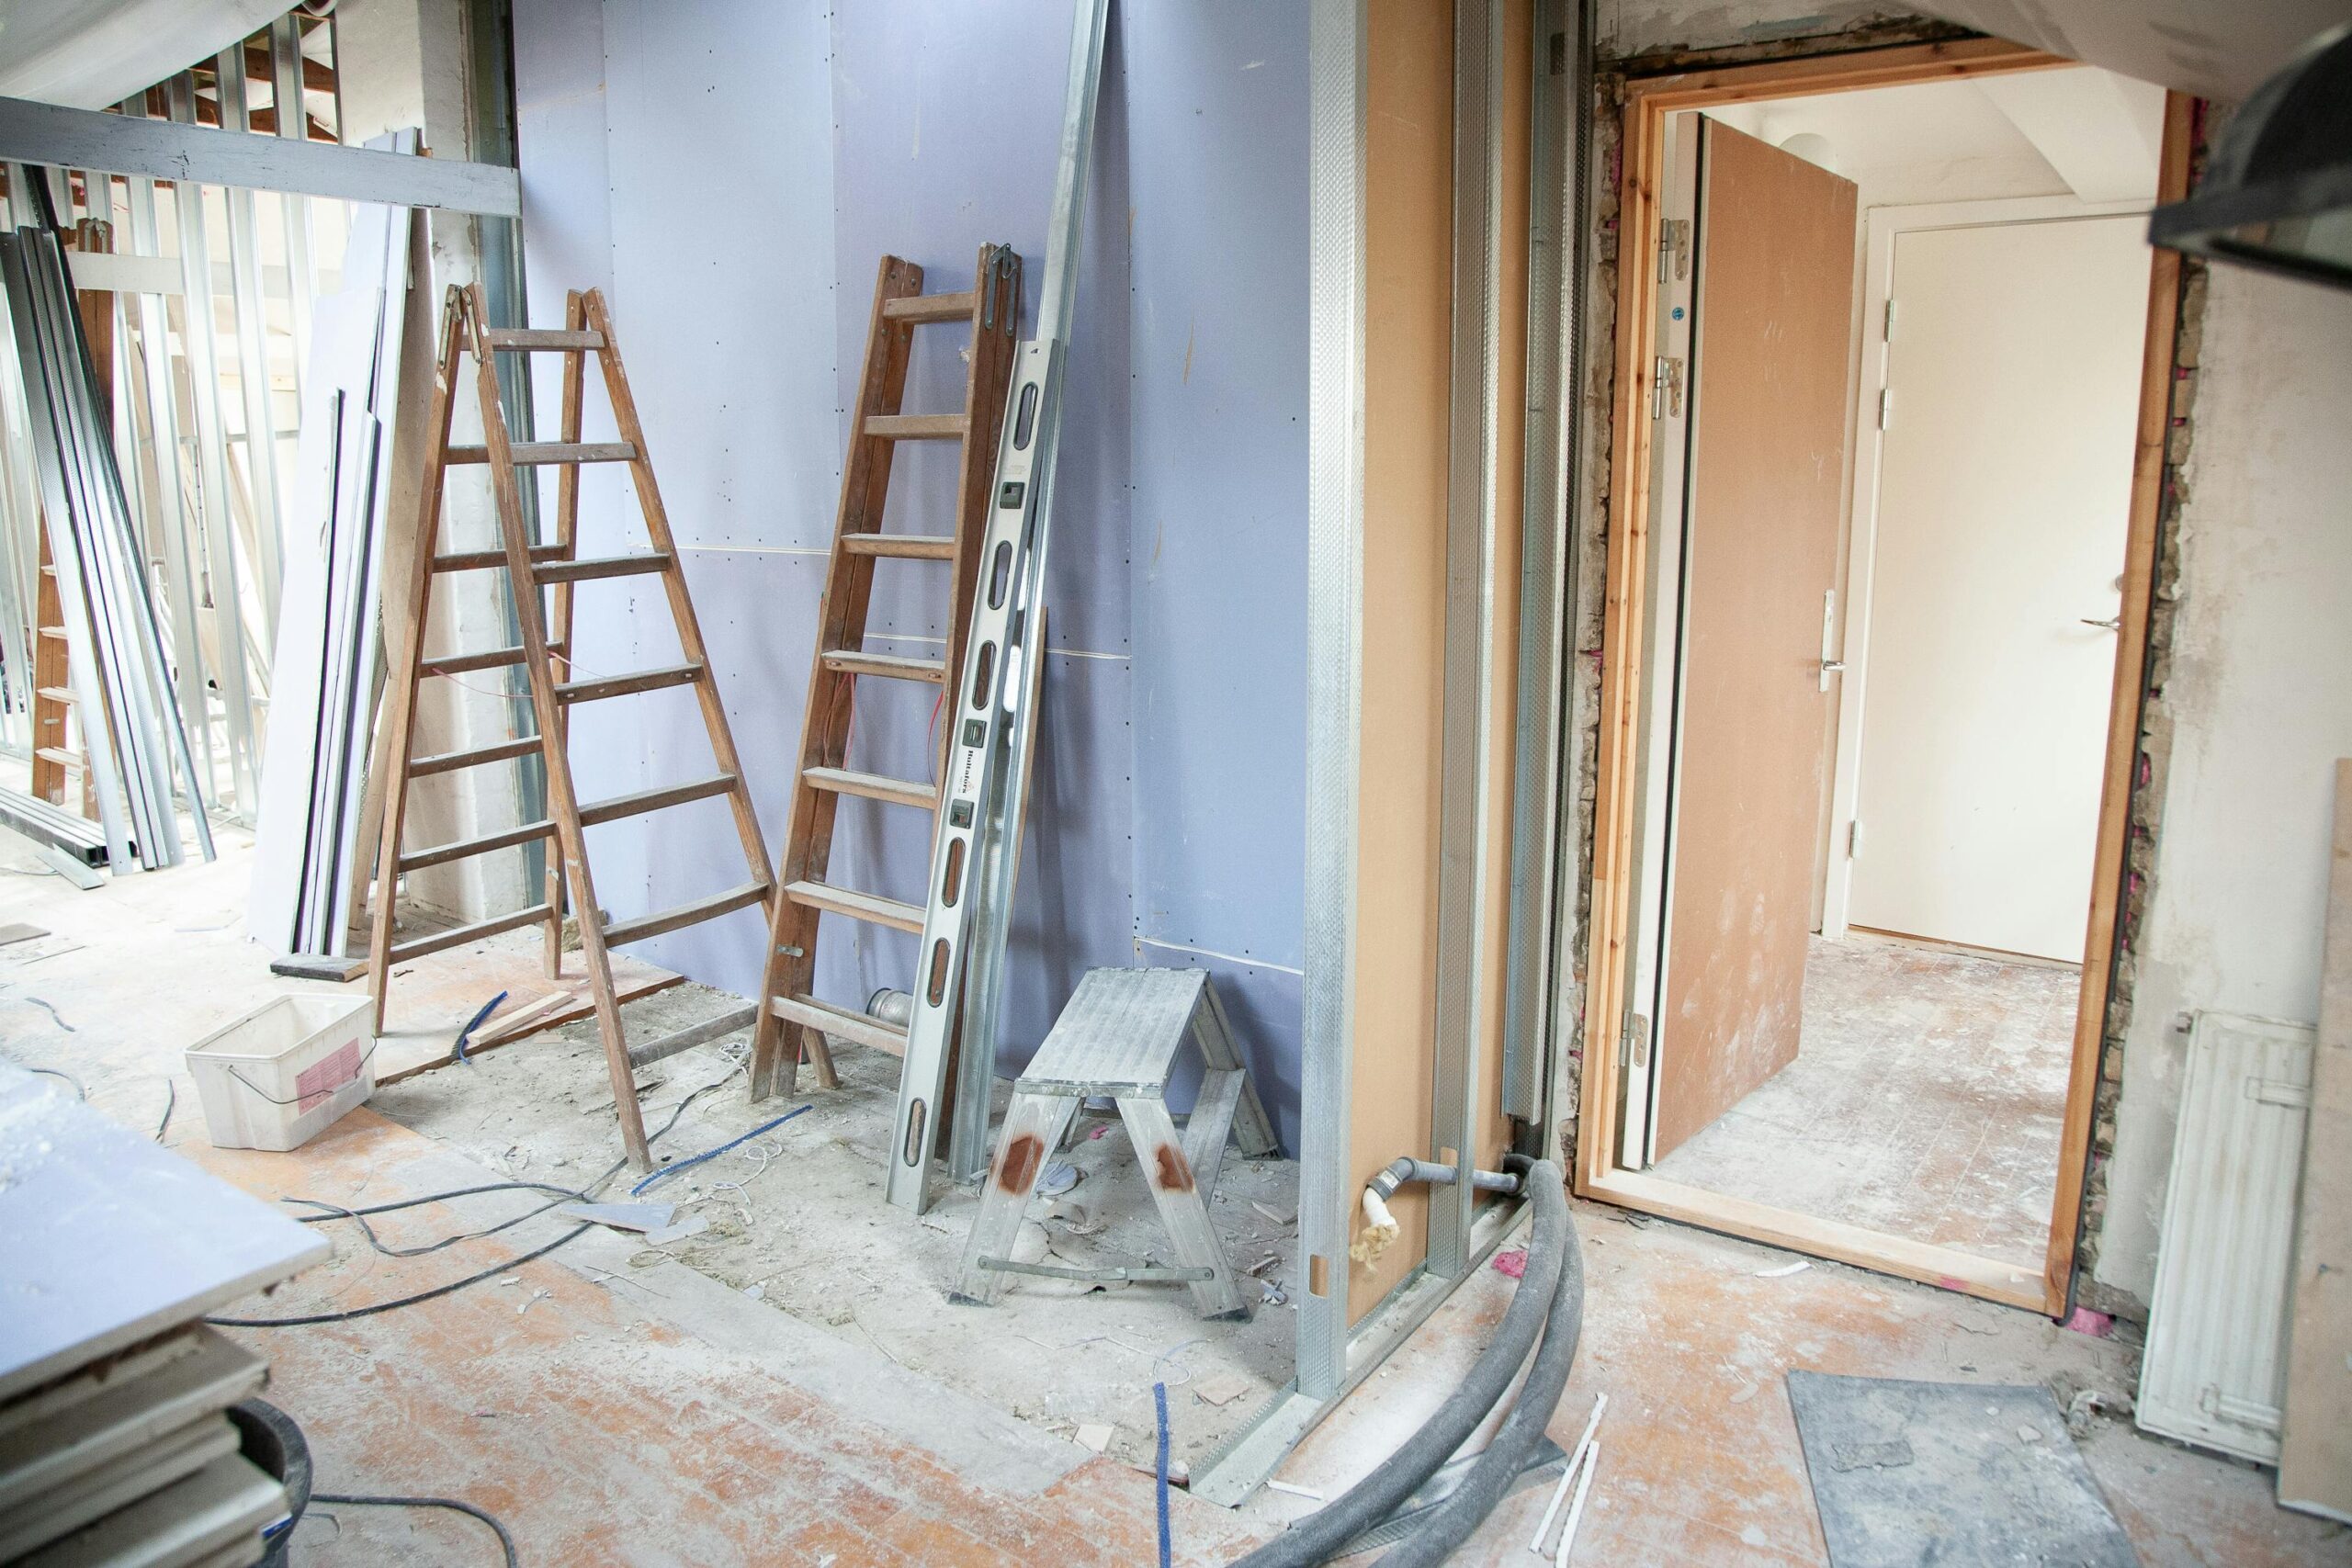 Ways to Keep Costs Low During a Renovation